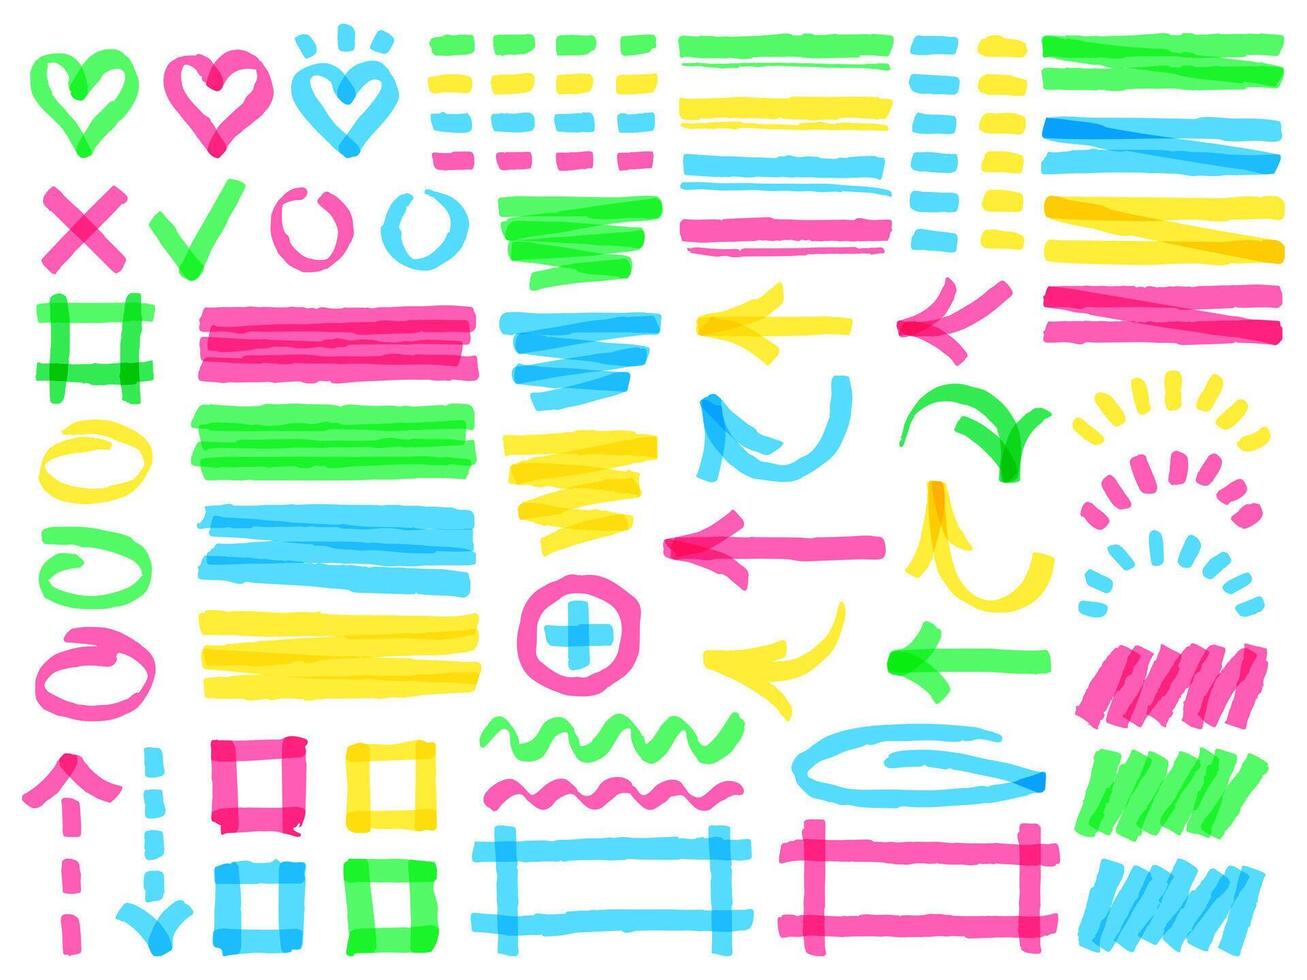 Highlight markers. Colorful marker strokes, yellow highlights arrows, frames and check marks, green hand drawn symbols vector illustration set